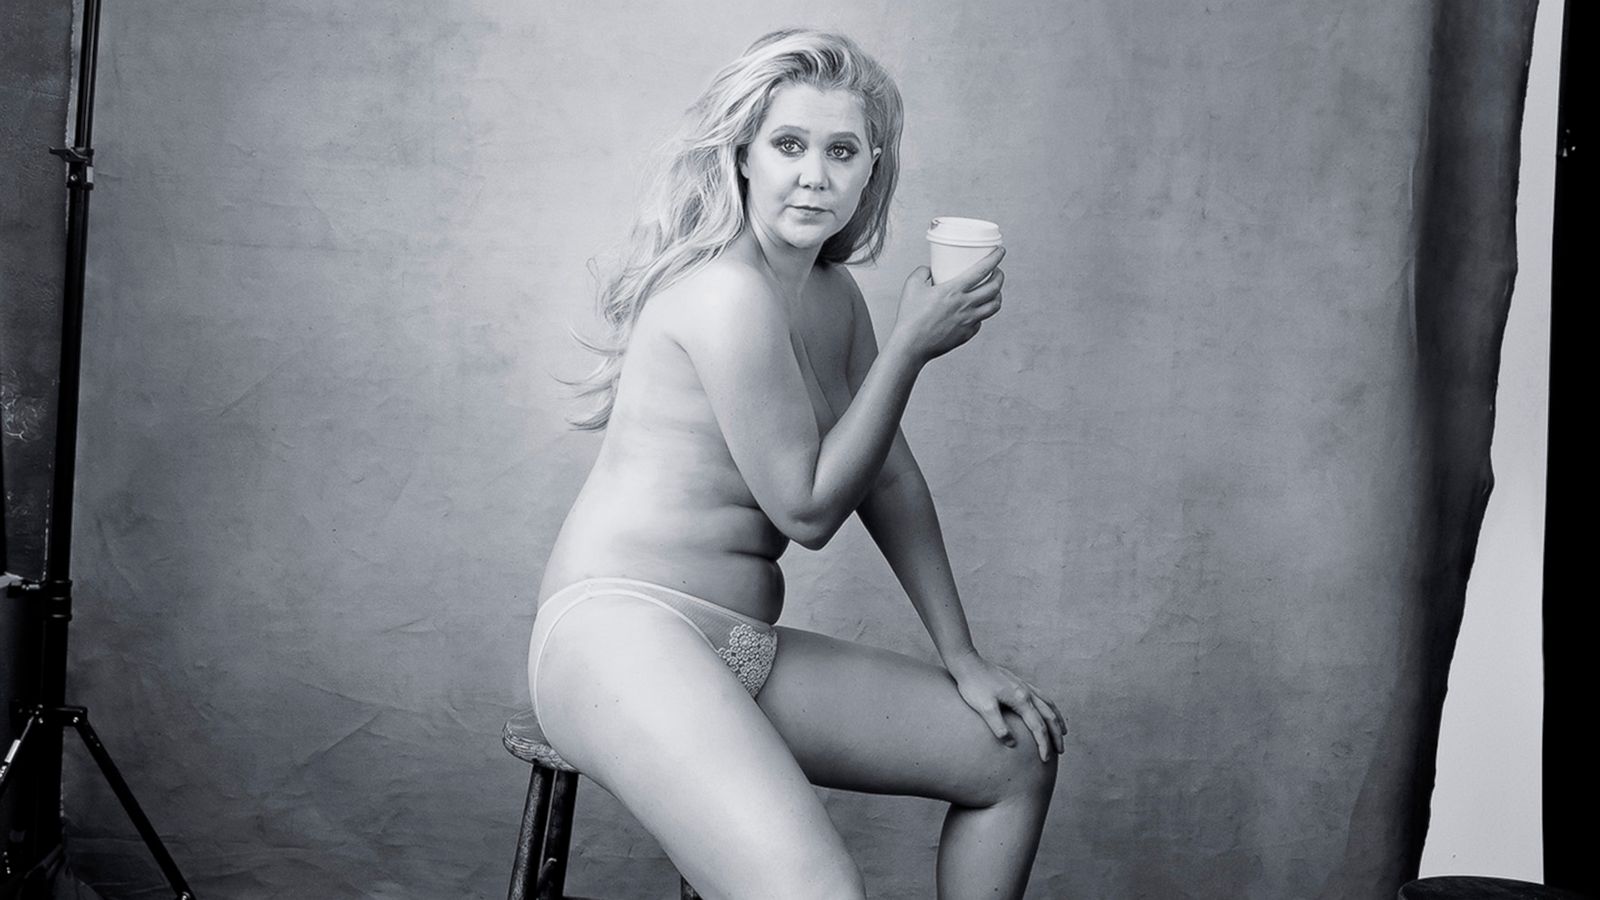 devin lassetter recommends Amy Schumer Nude Photoshoot